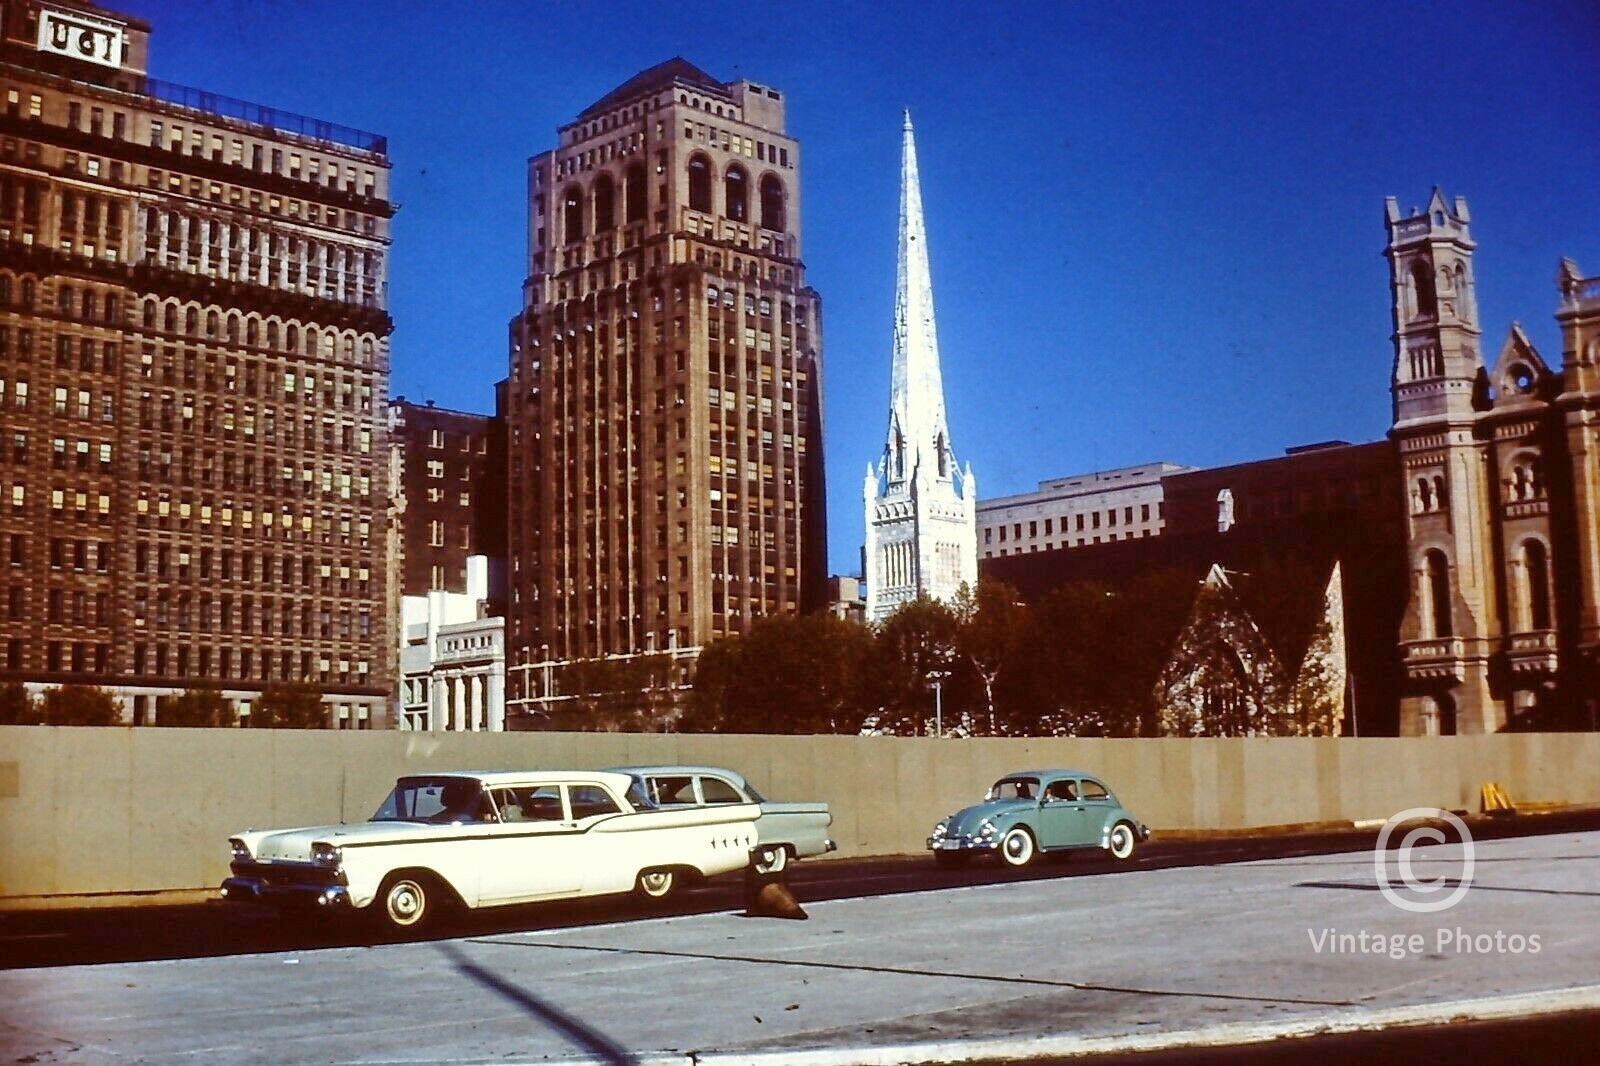 1960s Classic Cars on Street, Buildings